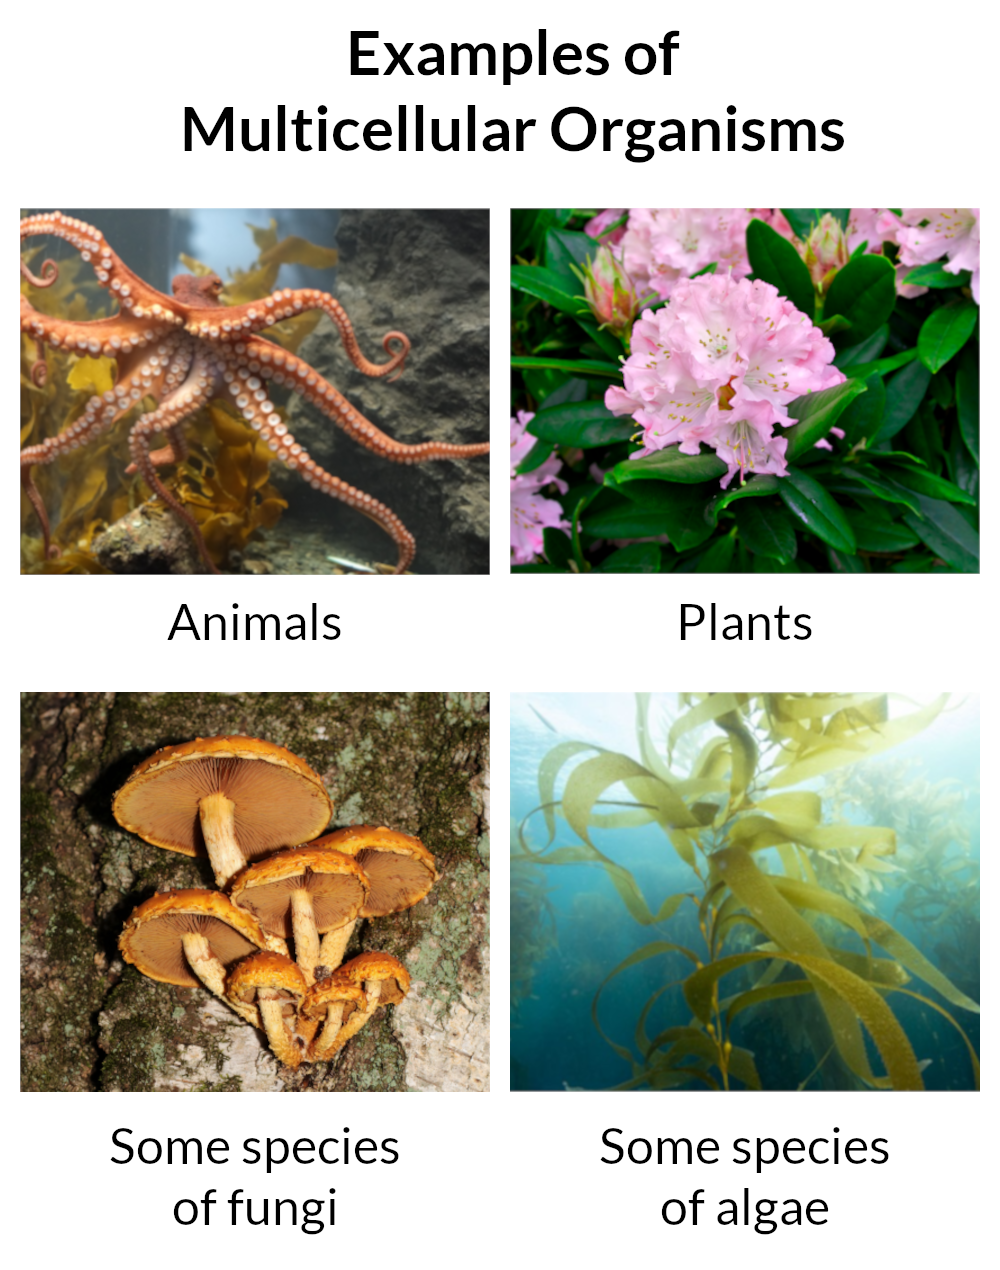 Photos of multicellular organisms. Text at the top says, "Examples of Multicellular Organisms". Then there is a photo of an octopus, labelled "Animals", a photo of some Rhododendrons, labelled "Plants", a photo of some mushrooms growing out of a tree, labelled "Some species of fungi", and a photo of some kelp, labelled "Some species of algae".